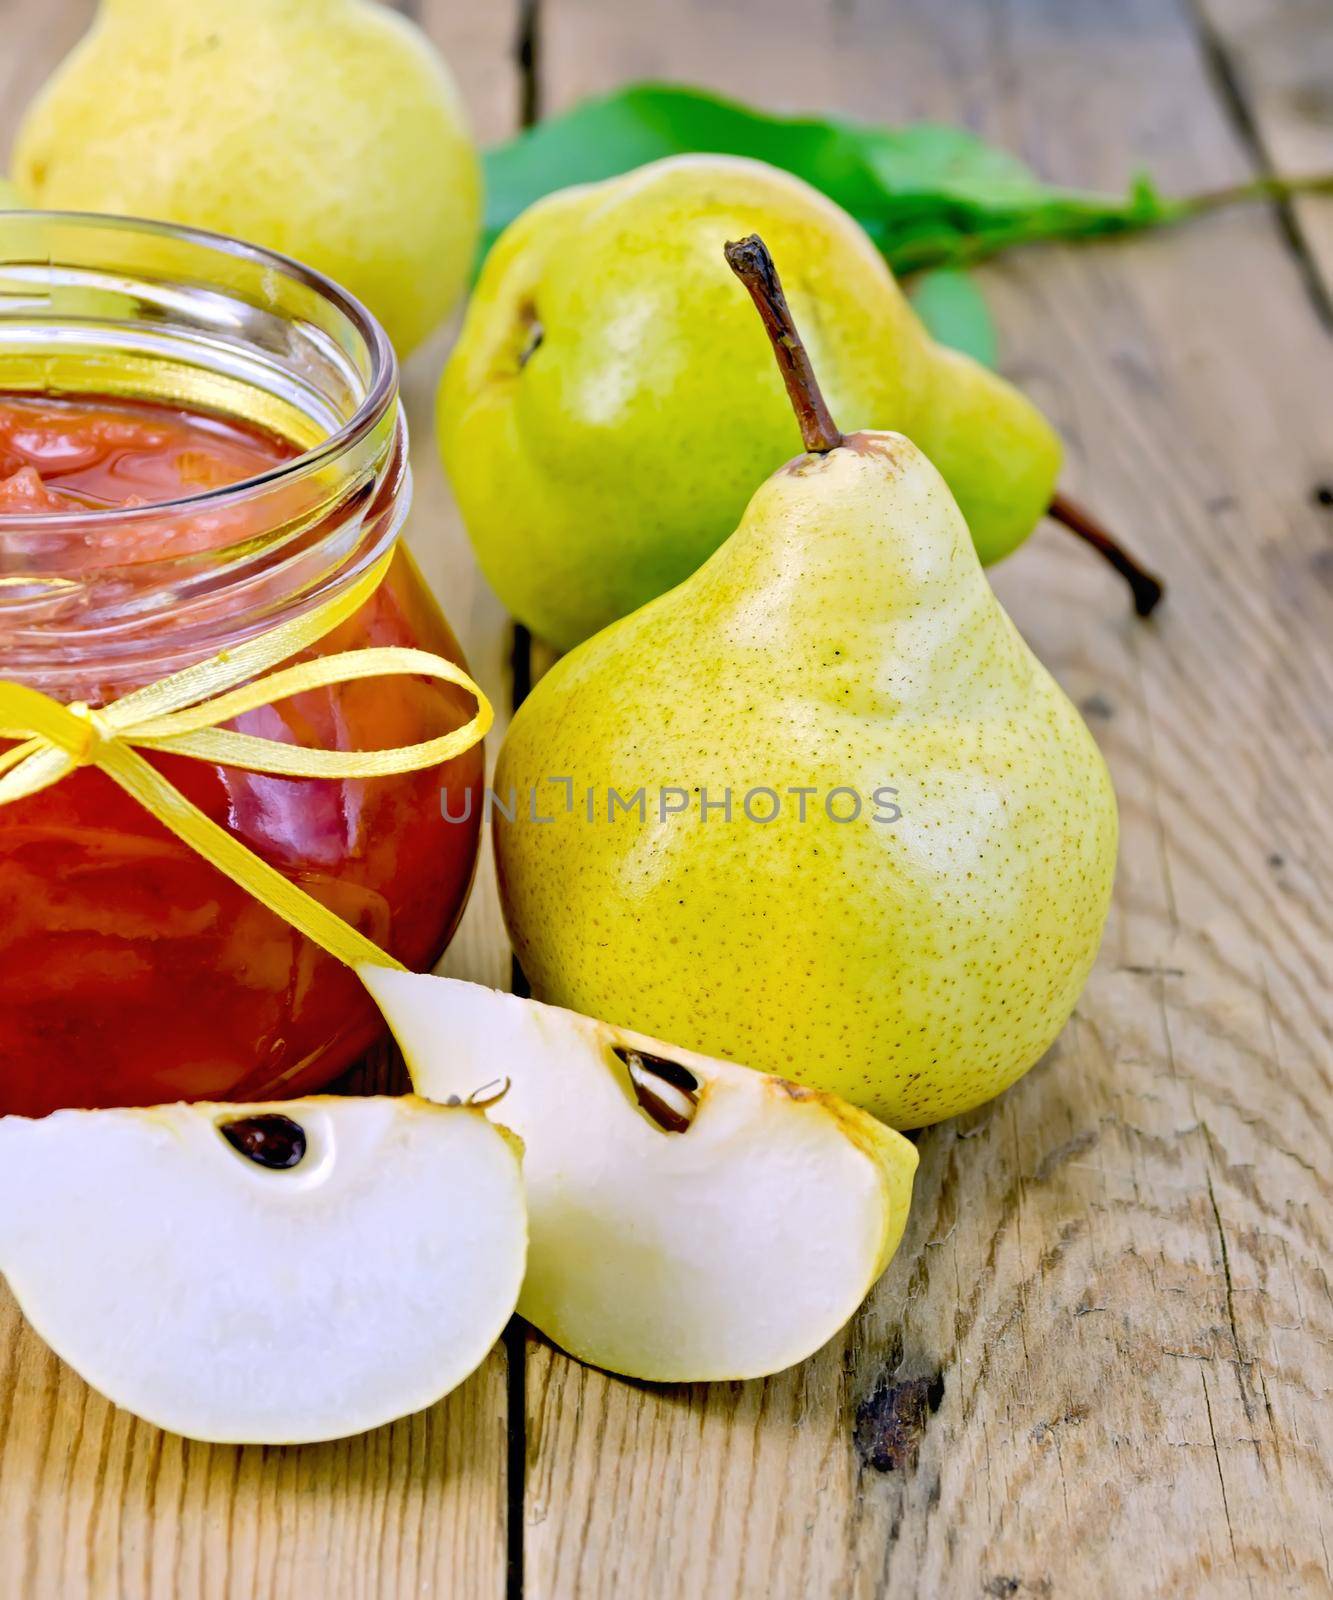 Pear jam in a glass jar, yellow pears whole and slices on a wooden boards background